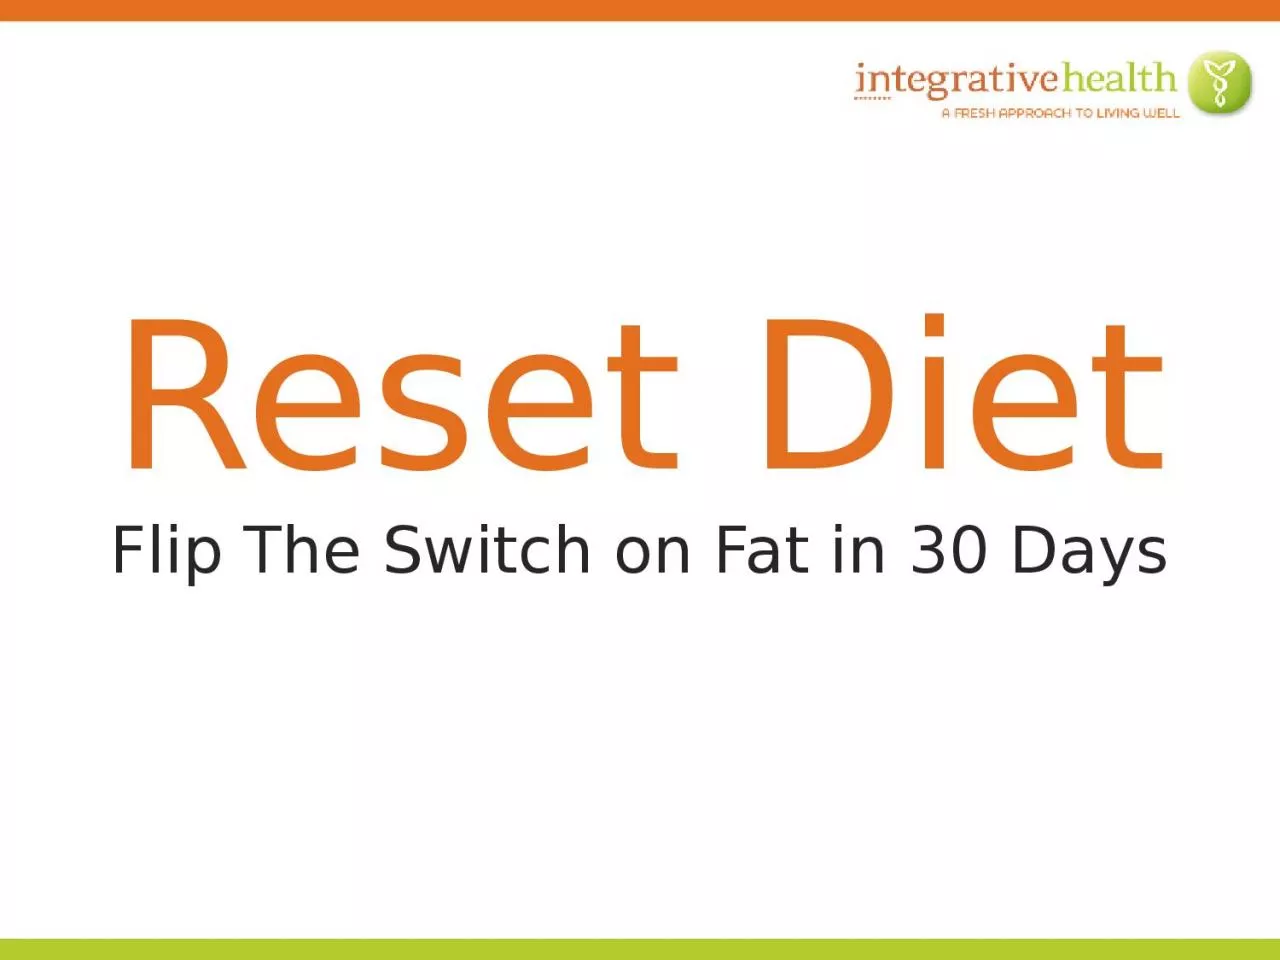 Flip The Switch on Fat in 30 Days